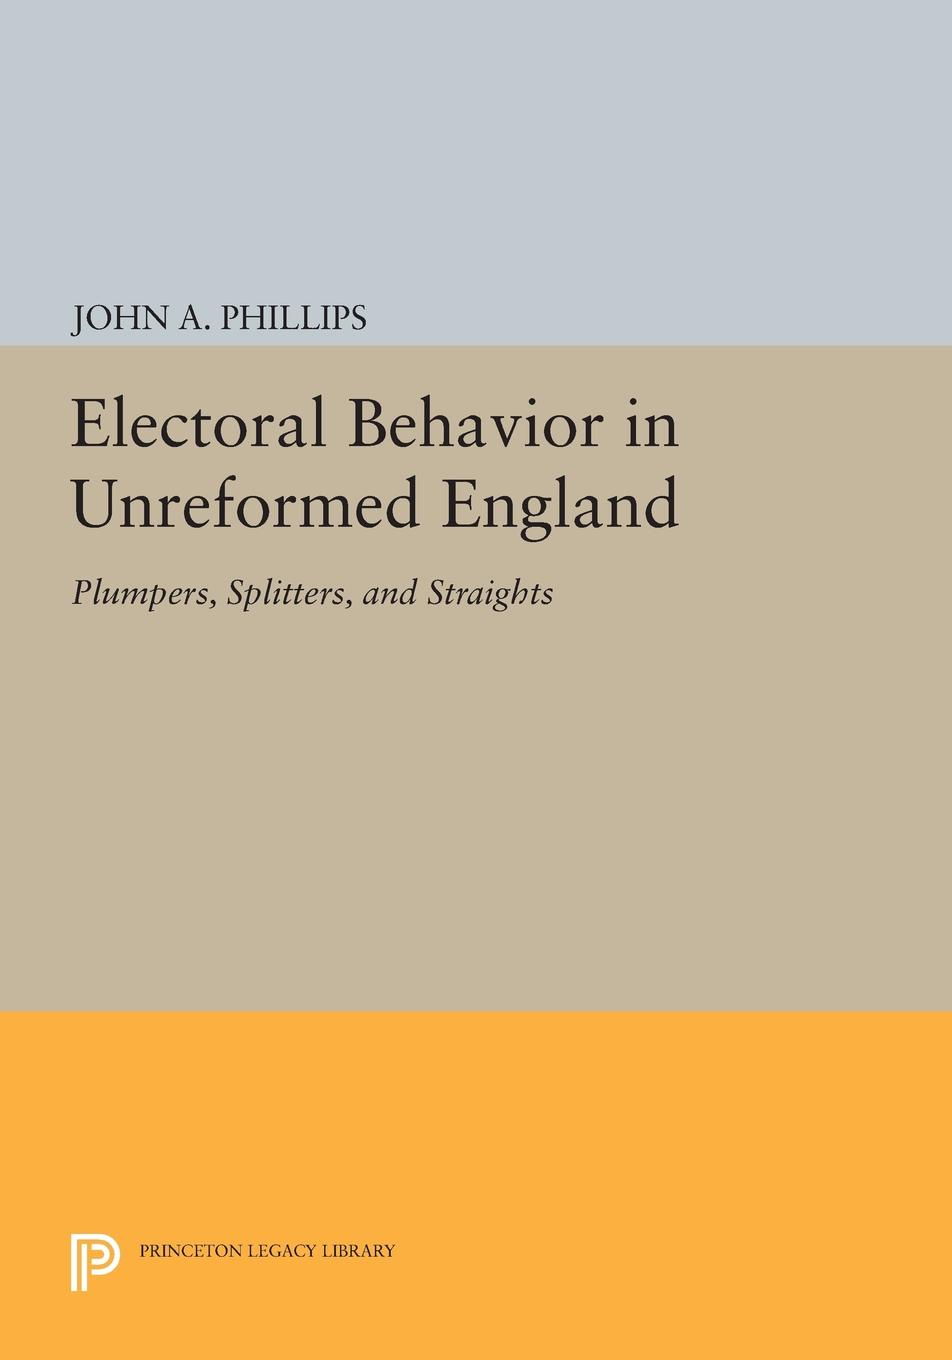 Electoral Behavior in Unreformed England. Plumpers, Splitters, and Straights